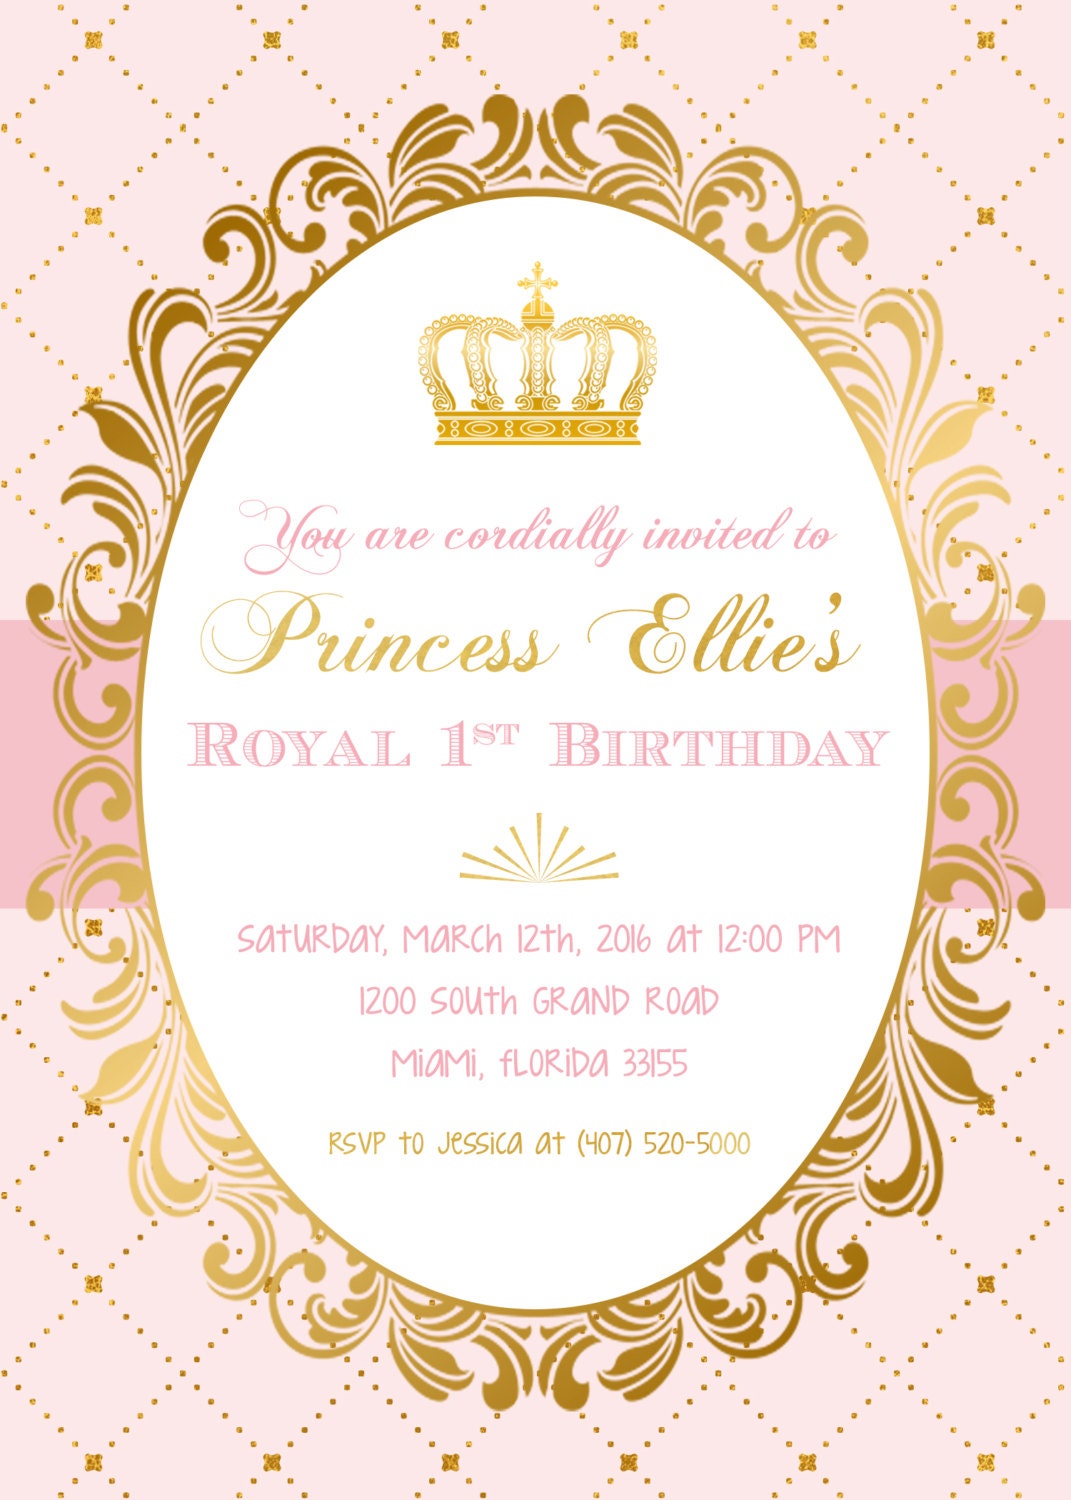 Pink and Gold Princess Birthday Party Invitation by CasaConfetti